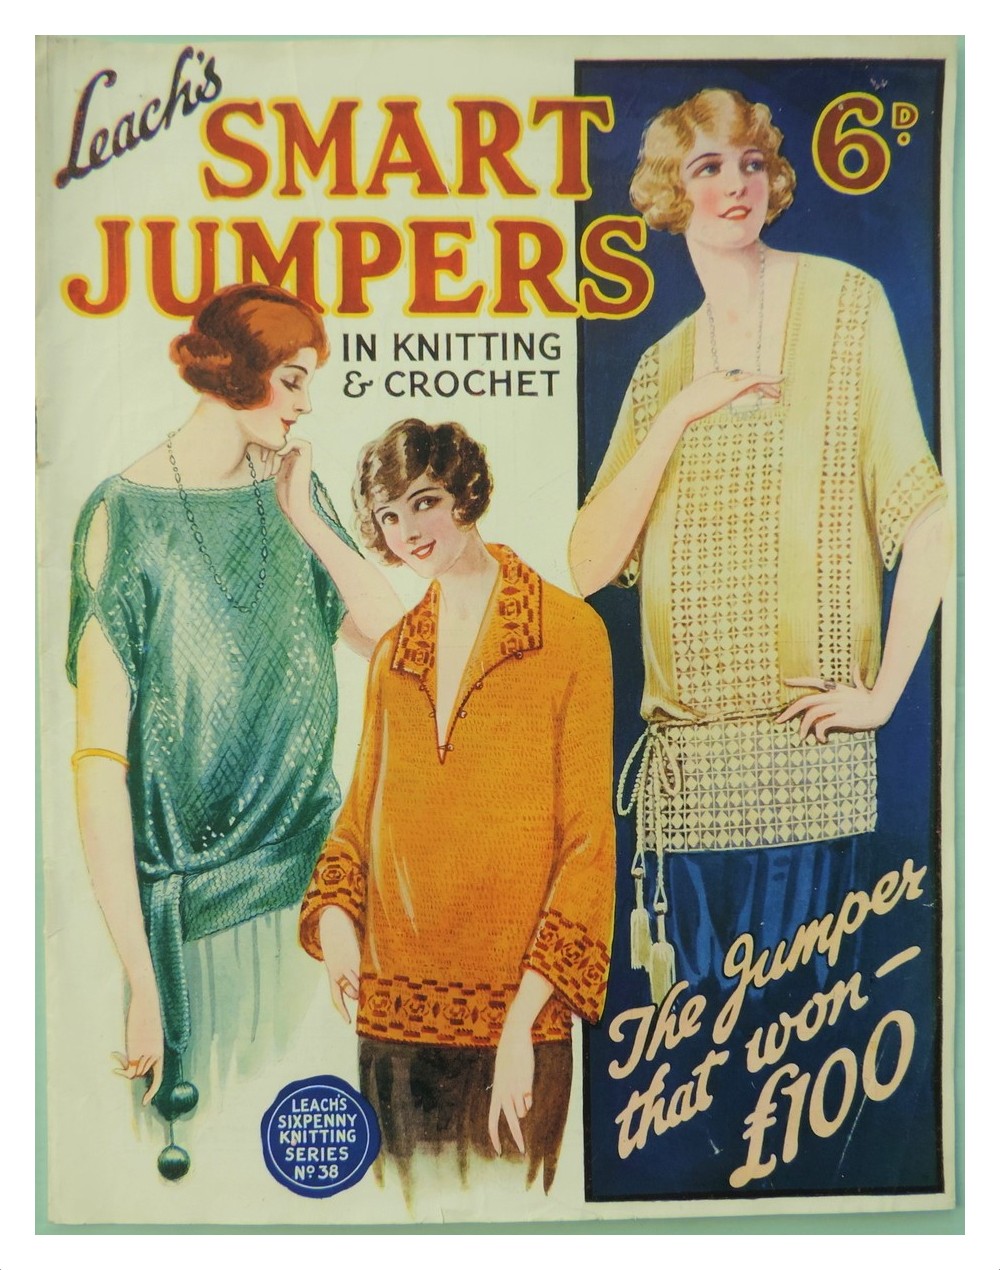 Cover or Leach's Smart Jumpers - three ladies wearing tops